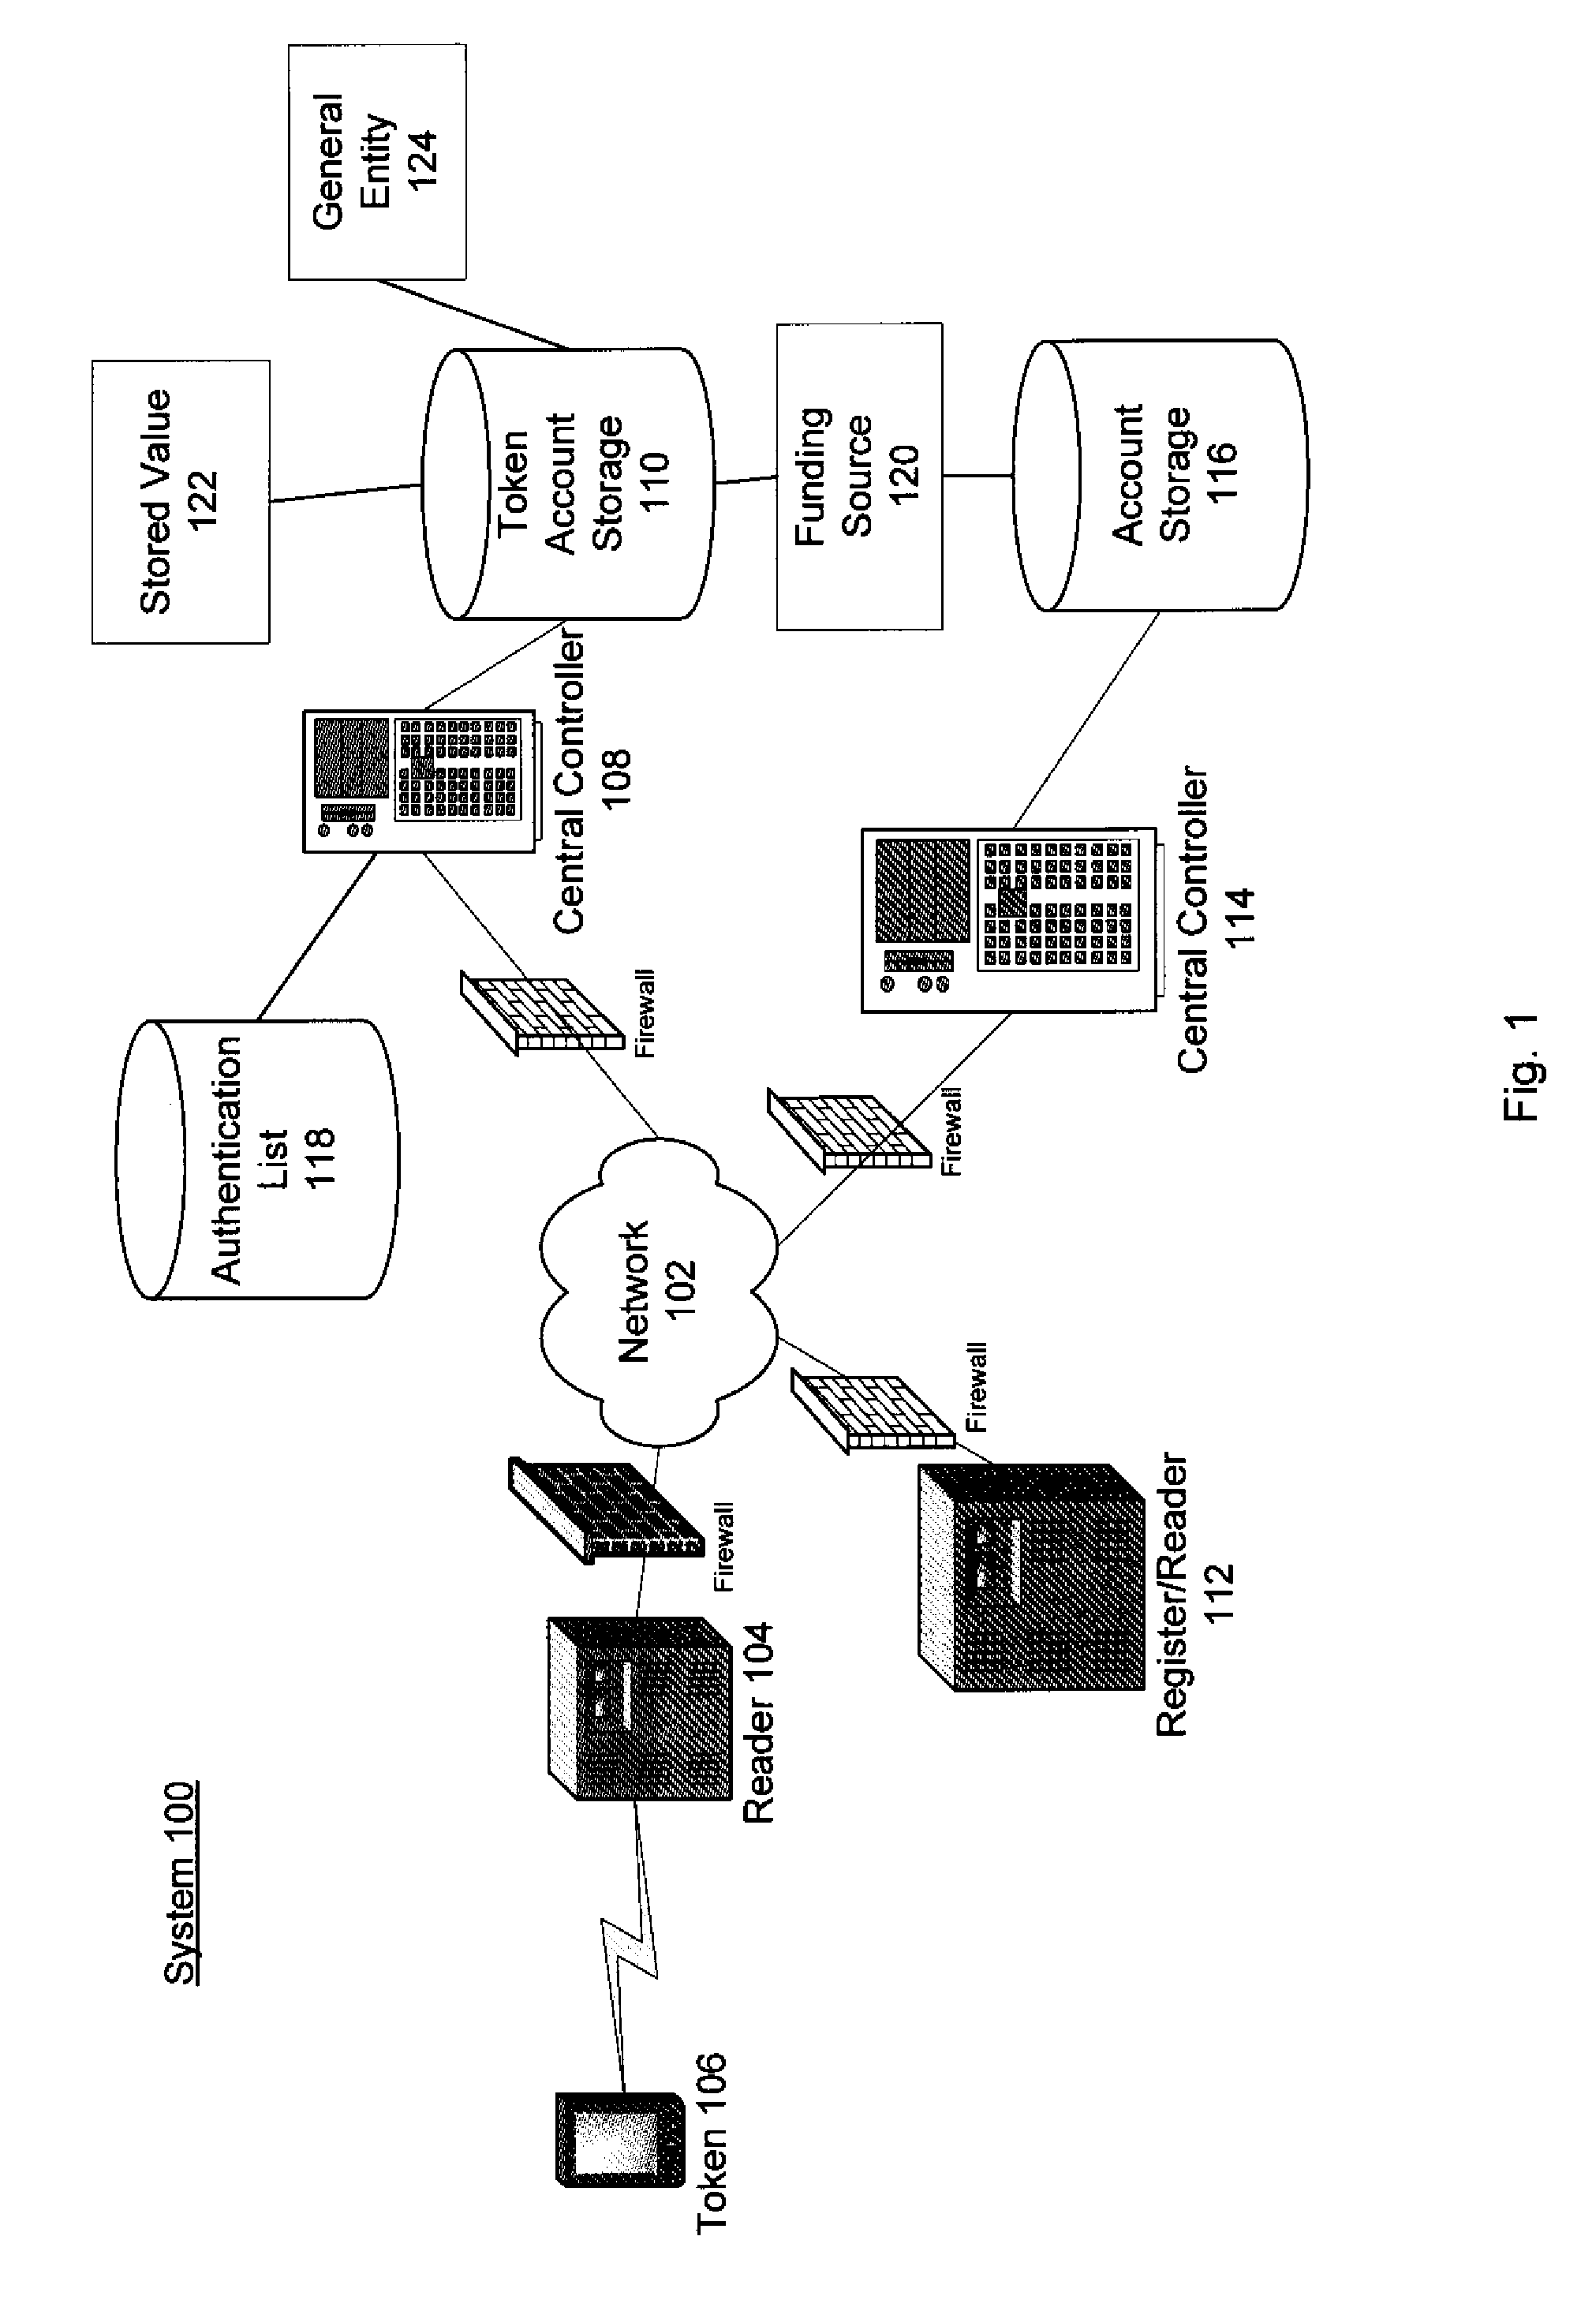 System and process for performing purchase transactions using tokens